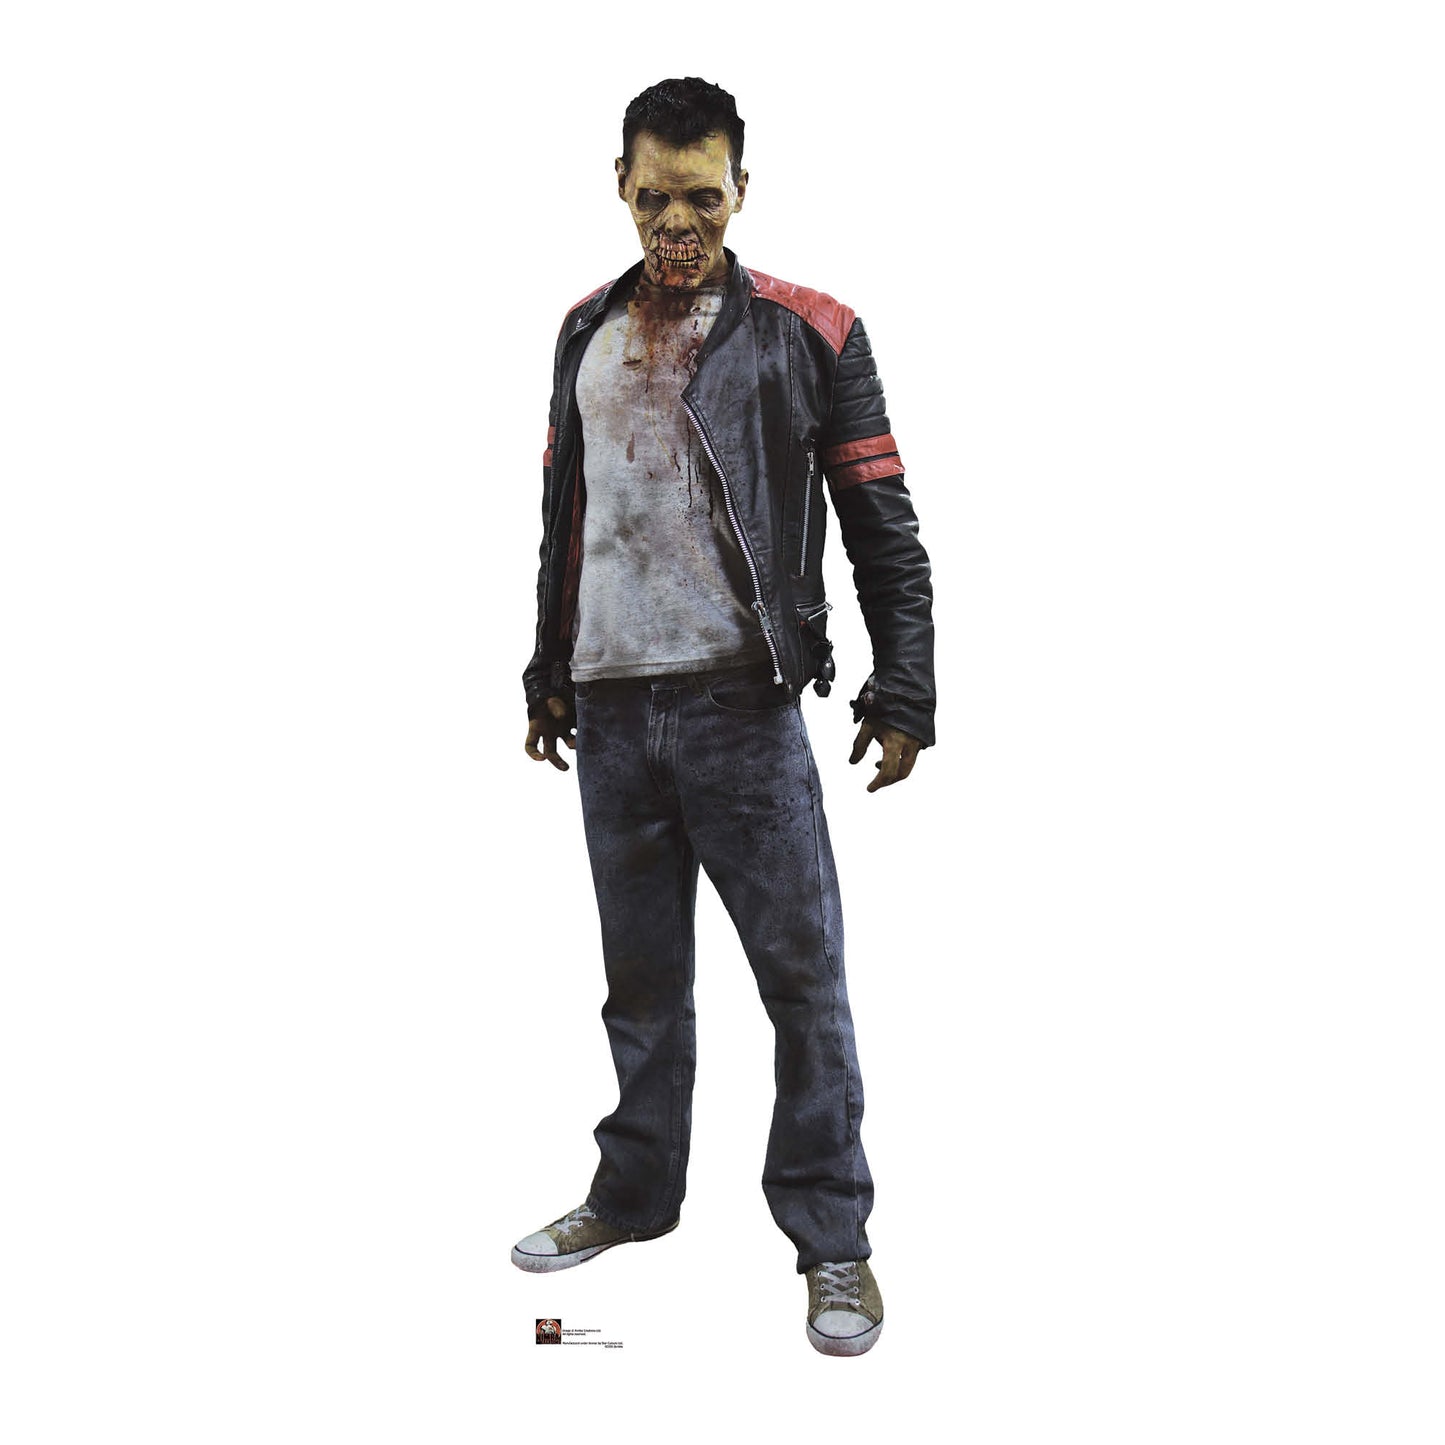 SC359 The Biter - Zombie Cardboard Cut Out Height 192cm